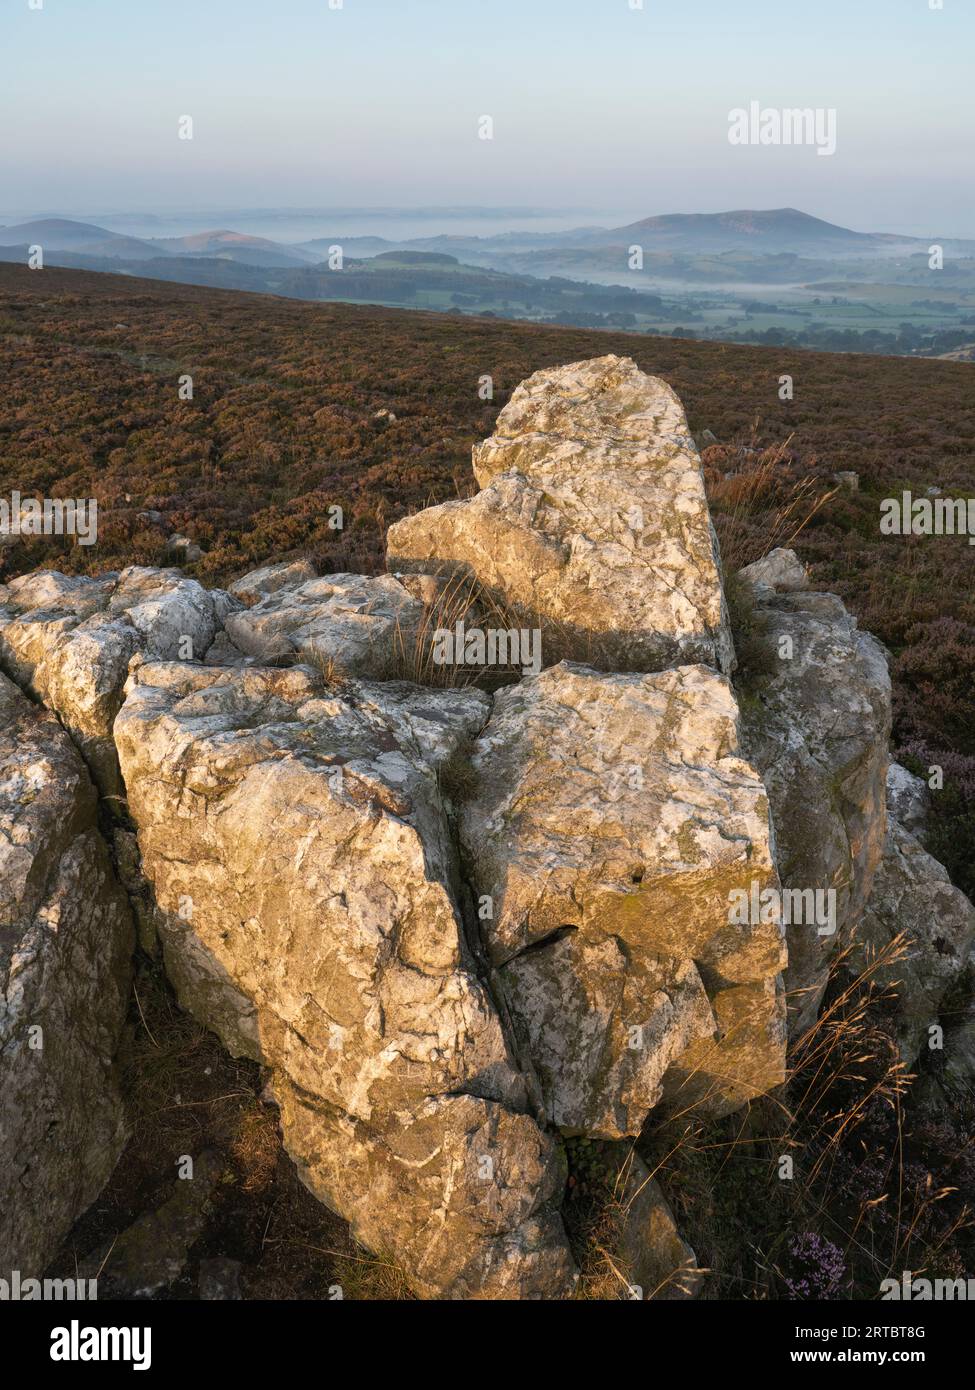 Scenery viewed from Stiperstones, a rocky quartzite ridge in South Shropshire, England. Stock Photo